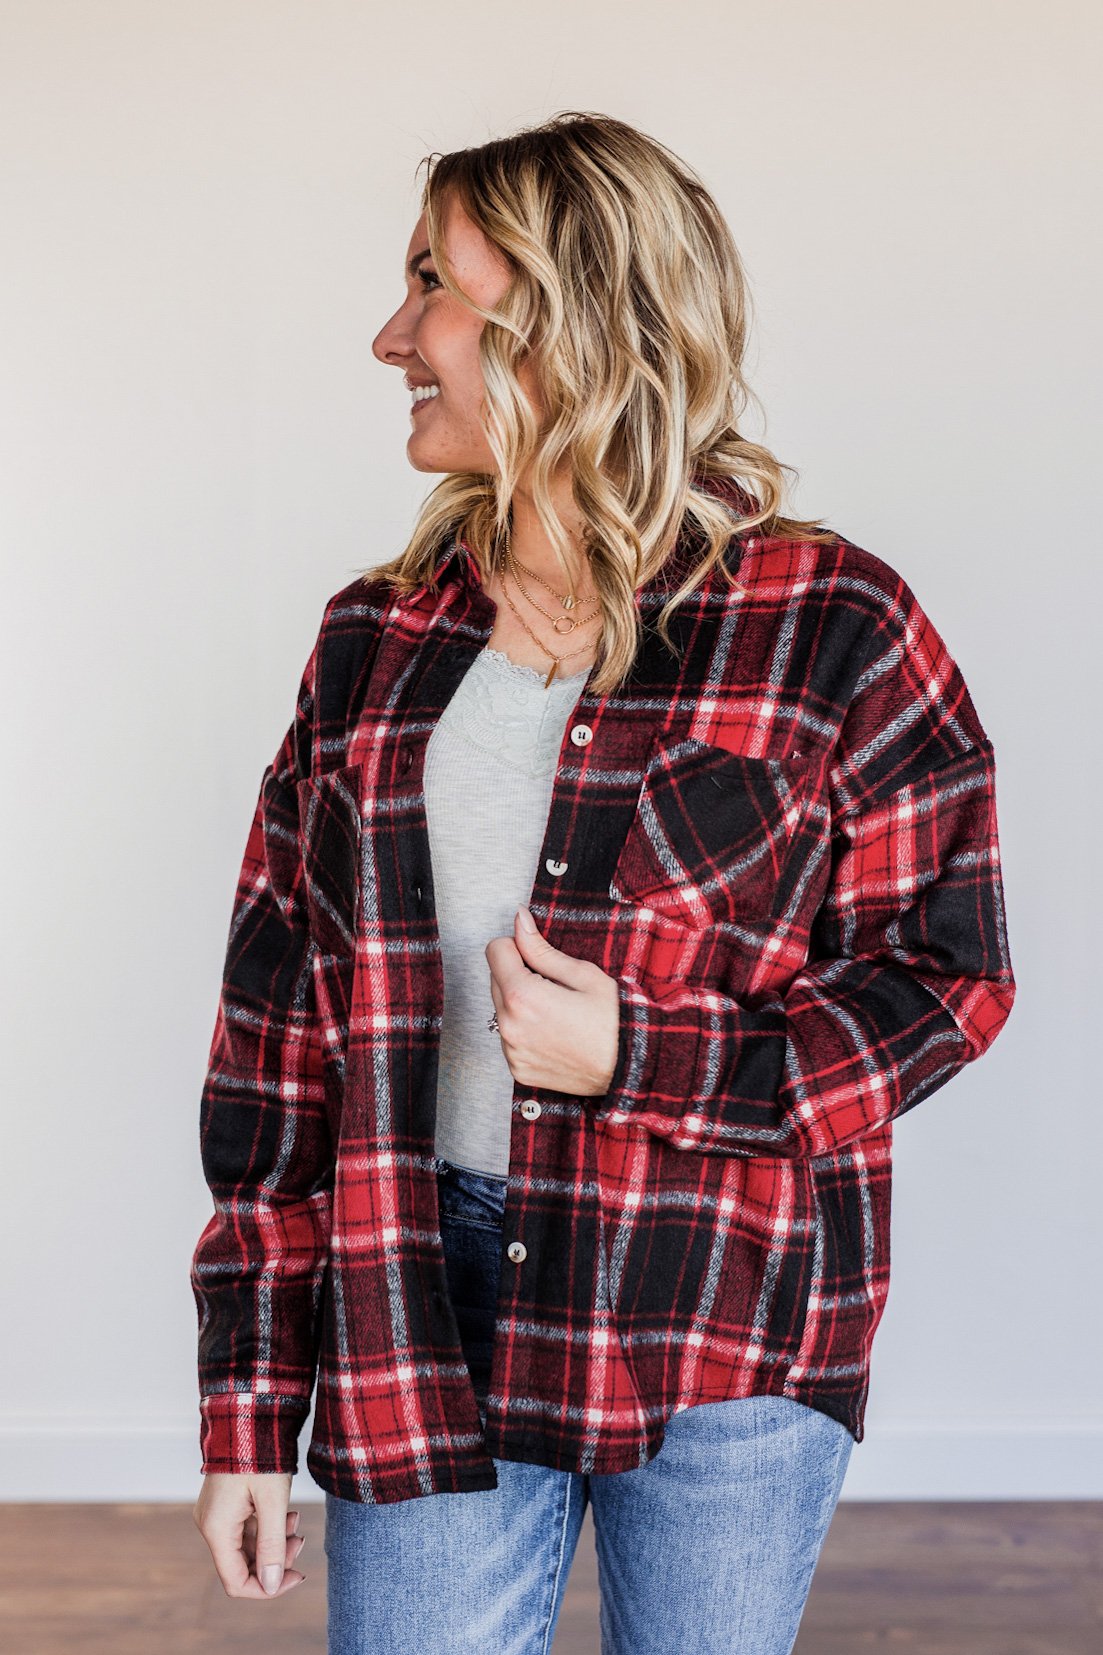 Happiest Of All Plaid Jacket- Black & Red